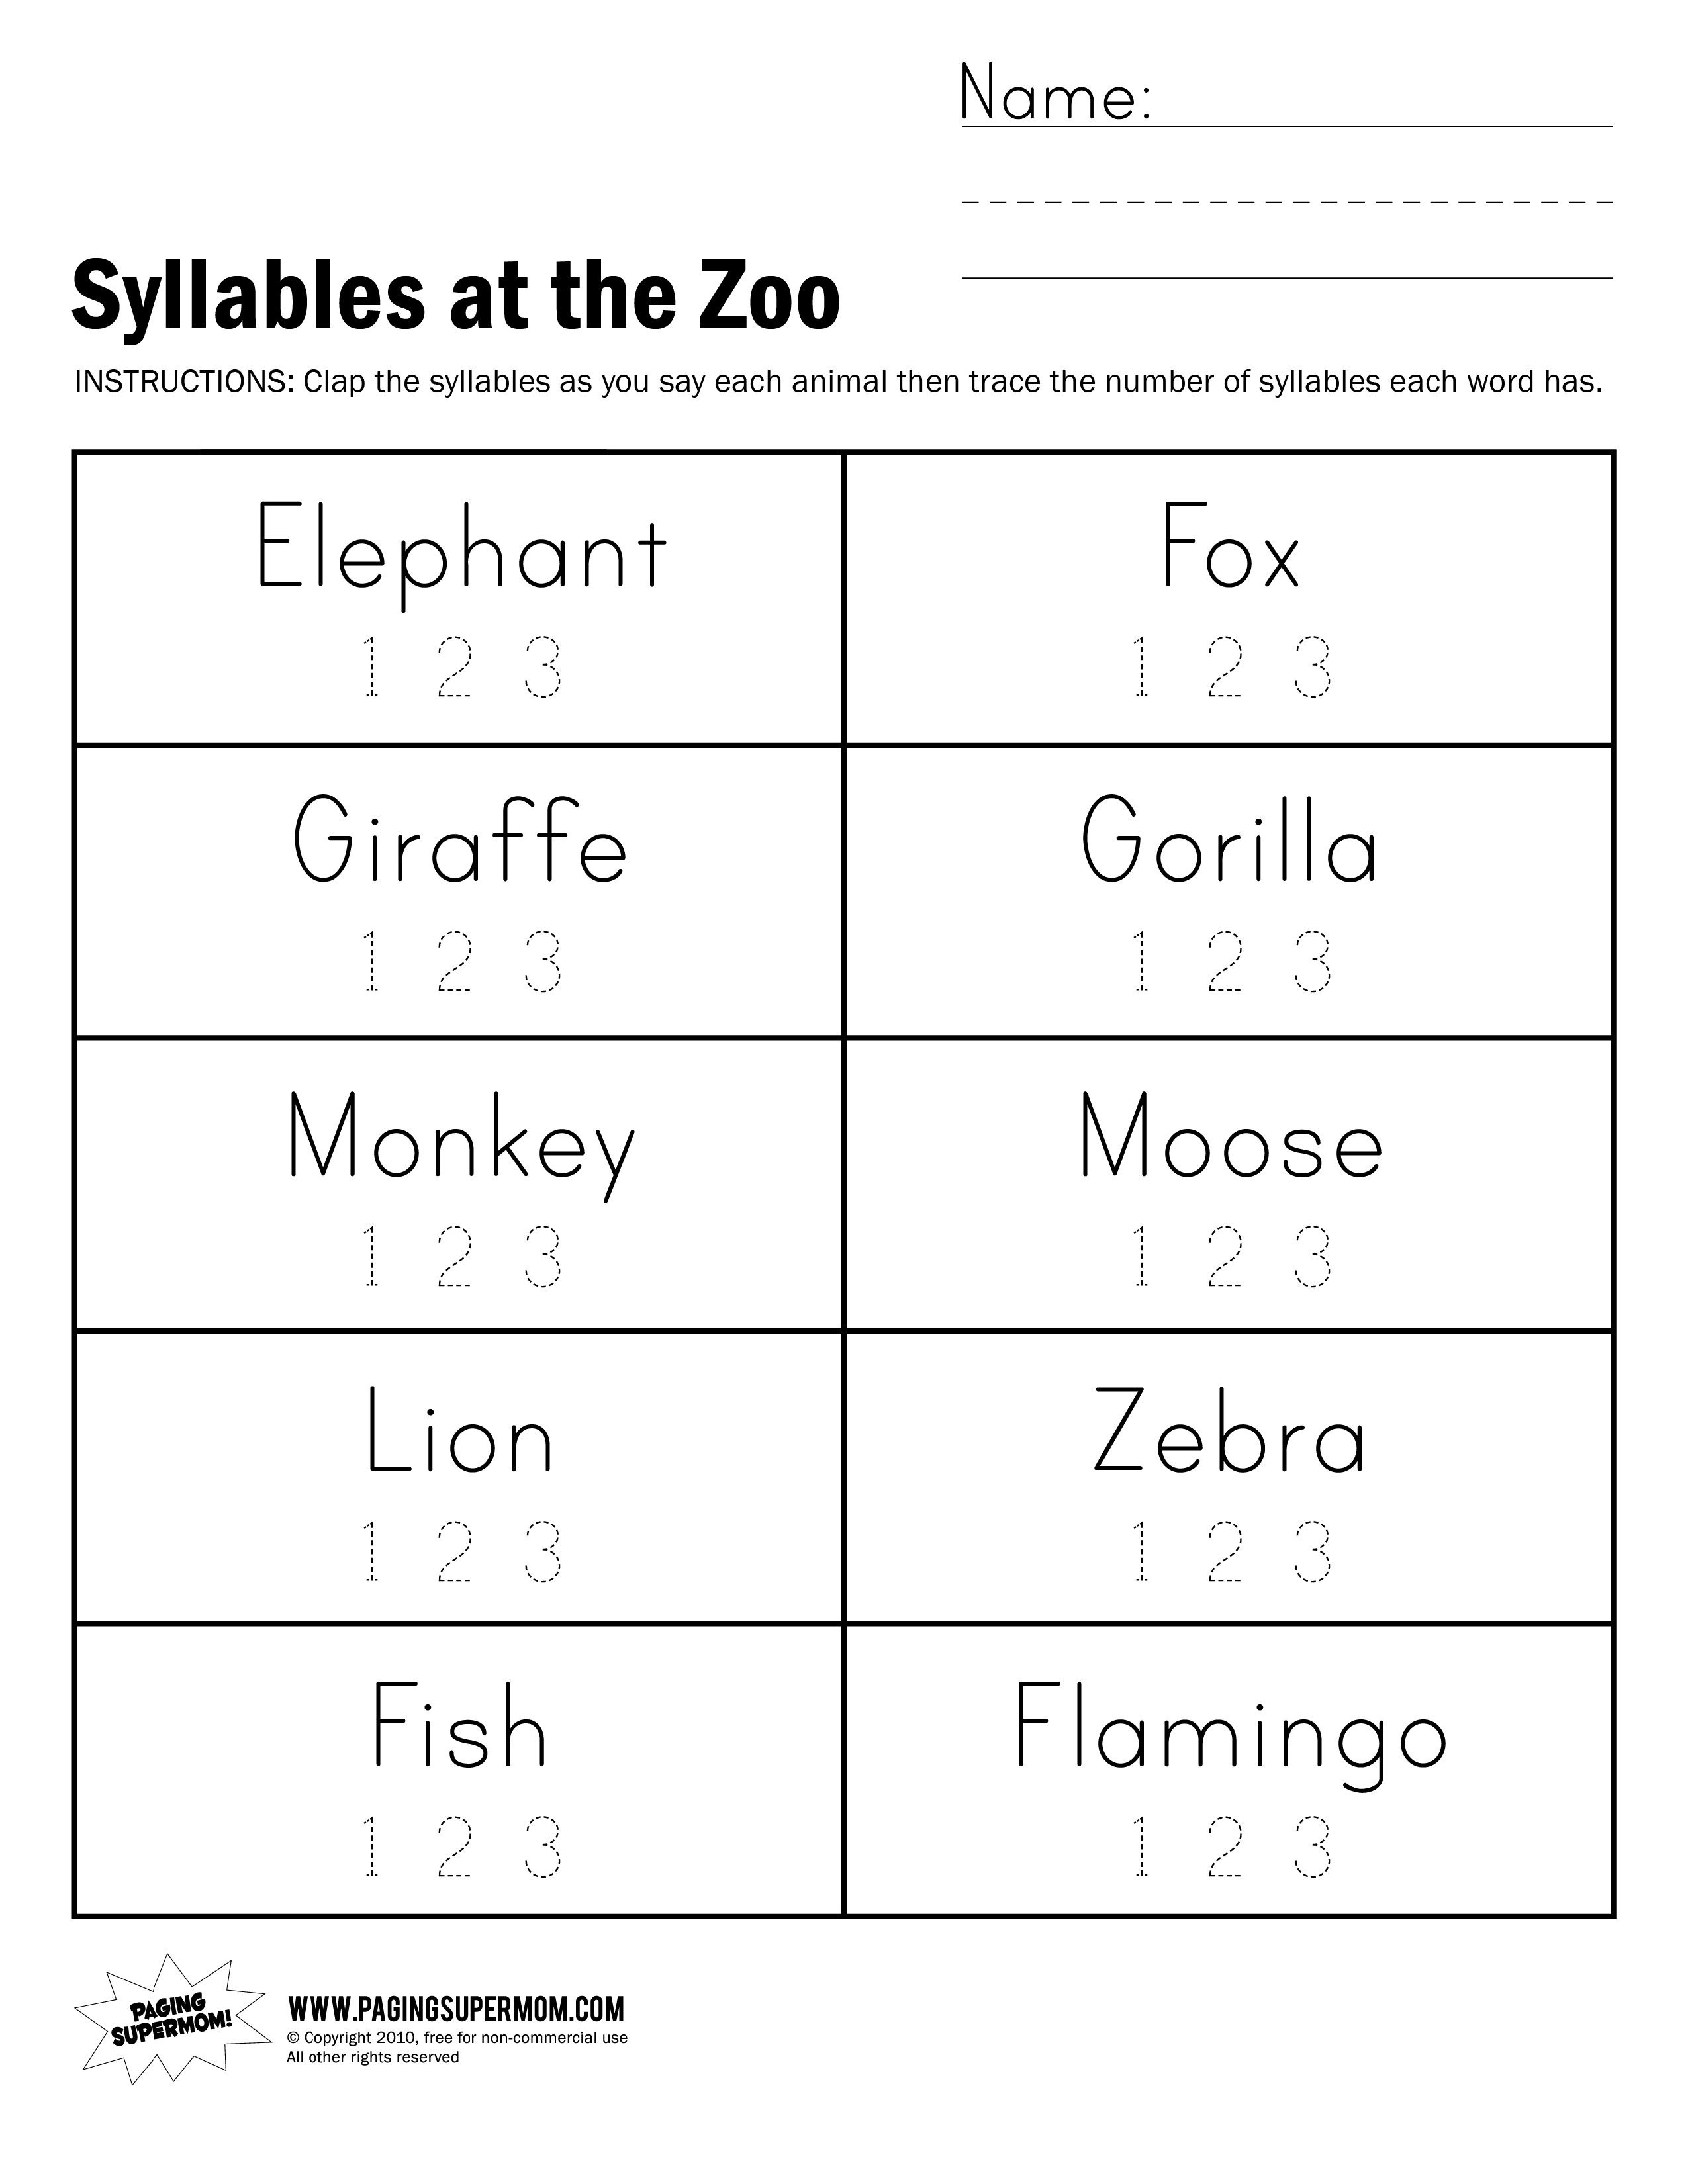 Syllables At The Zoo Worksheet | Reading | Syllable, Worksheets - Free Printable Open And Closed Syllable Worksheets